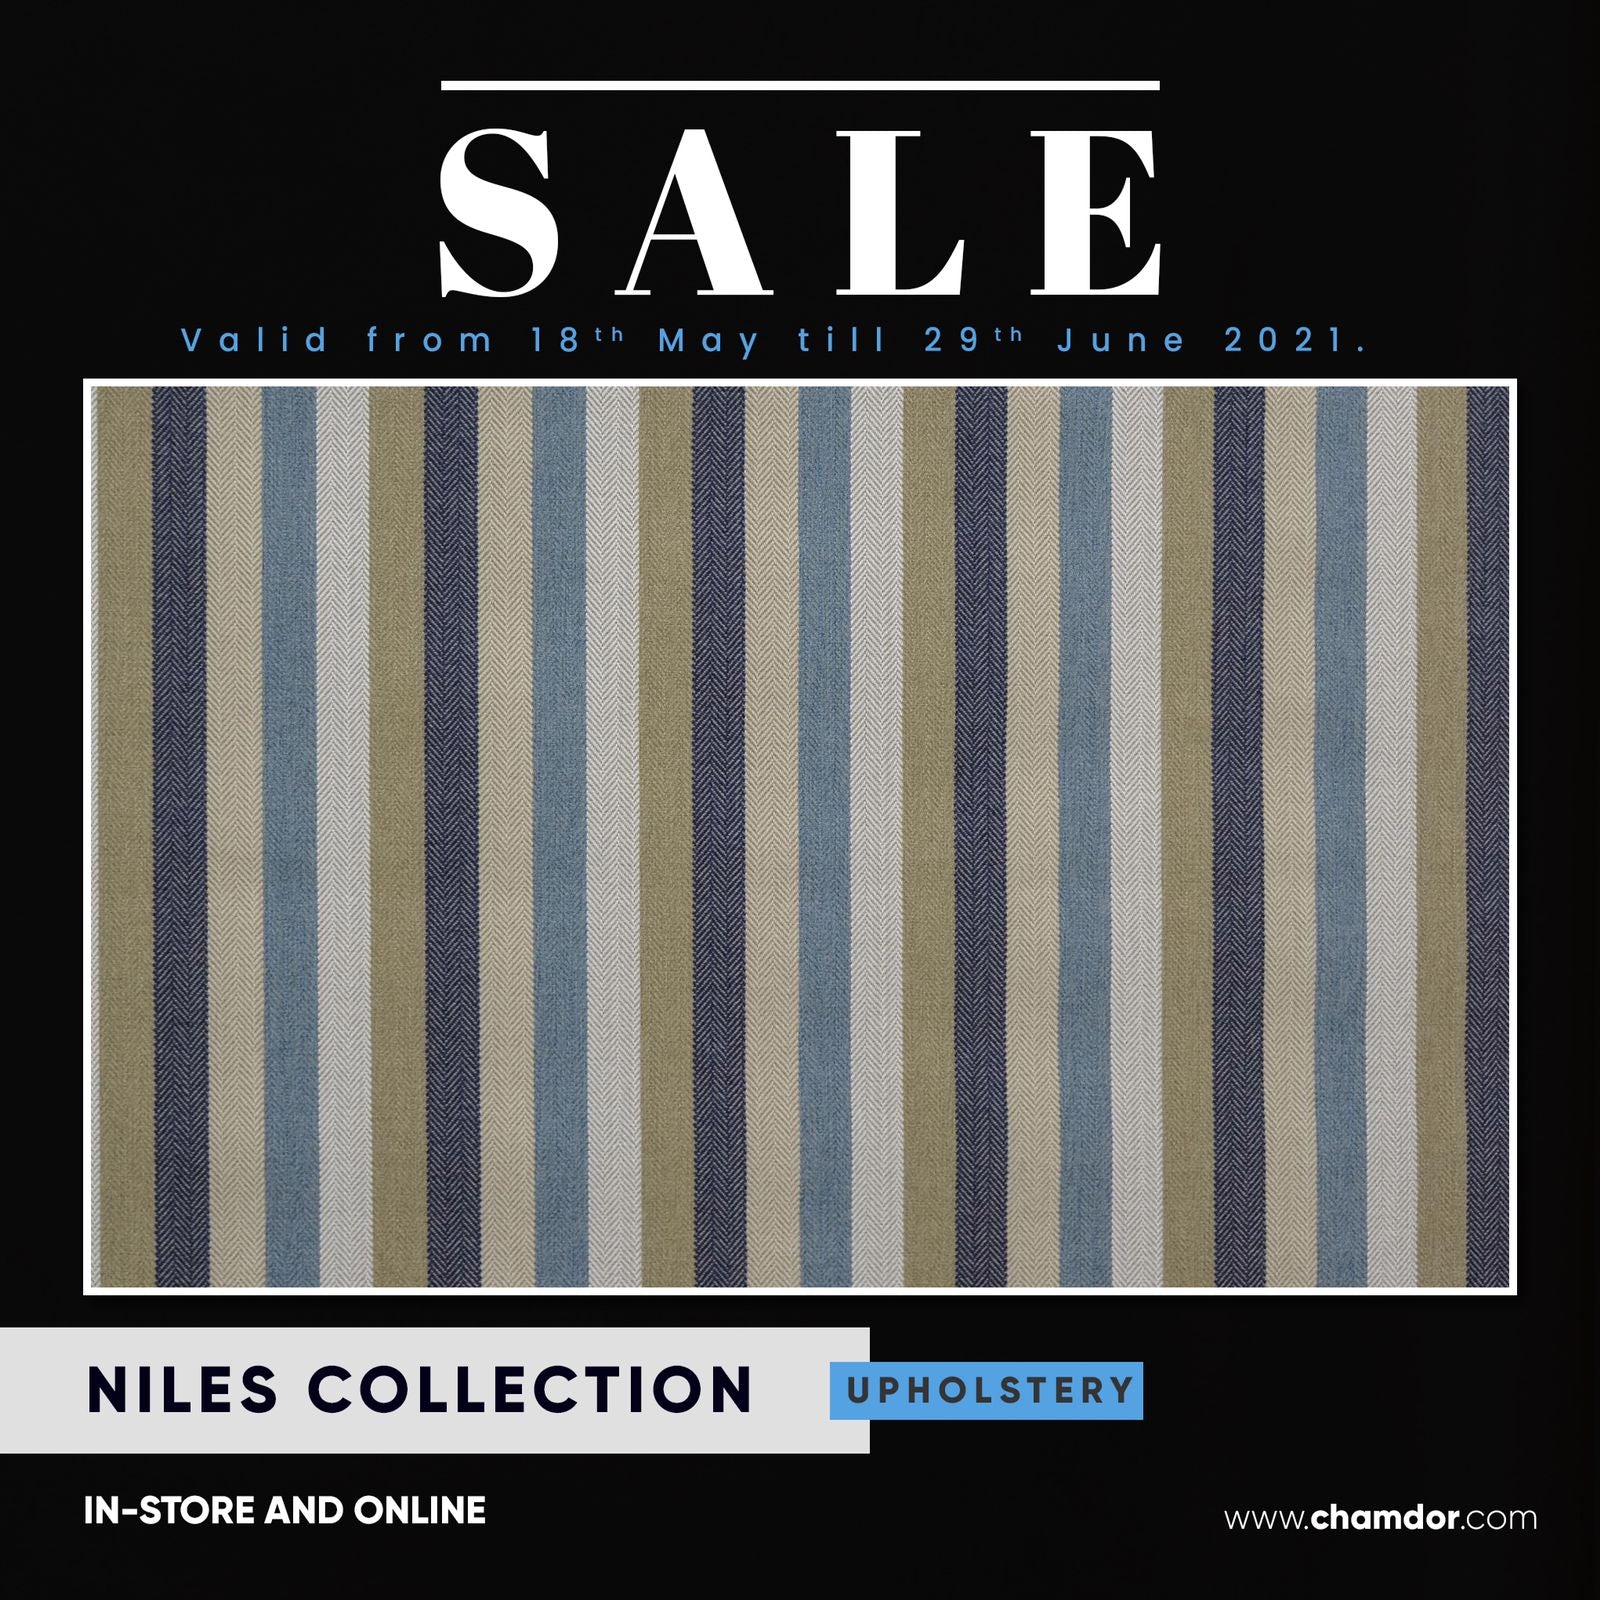 Niles Collection - SALE